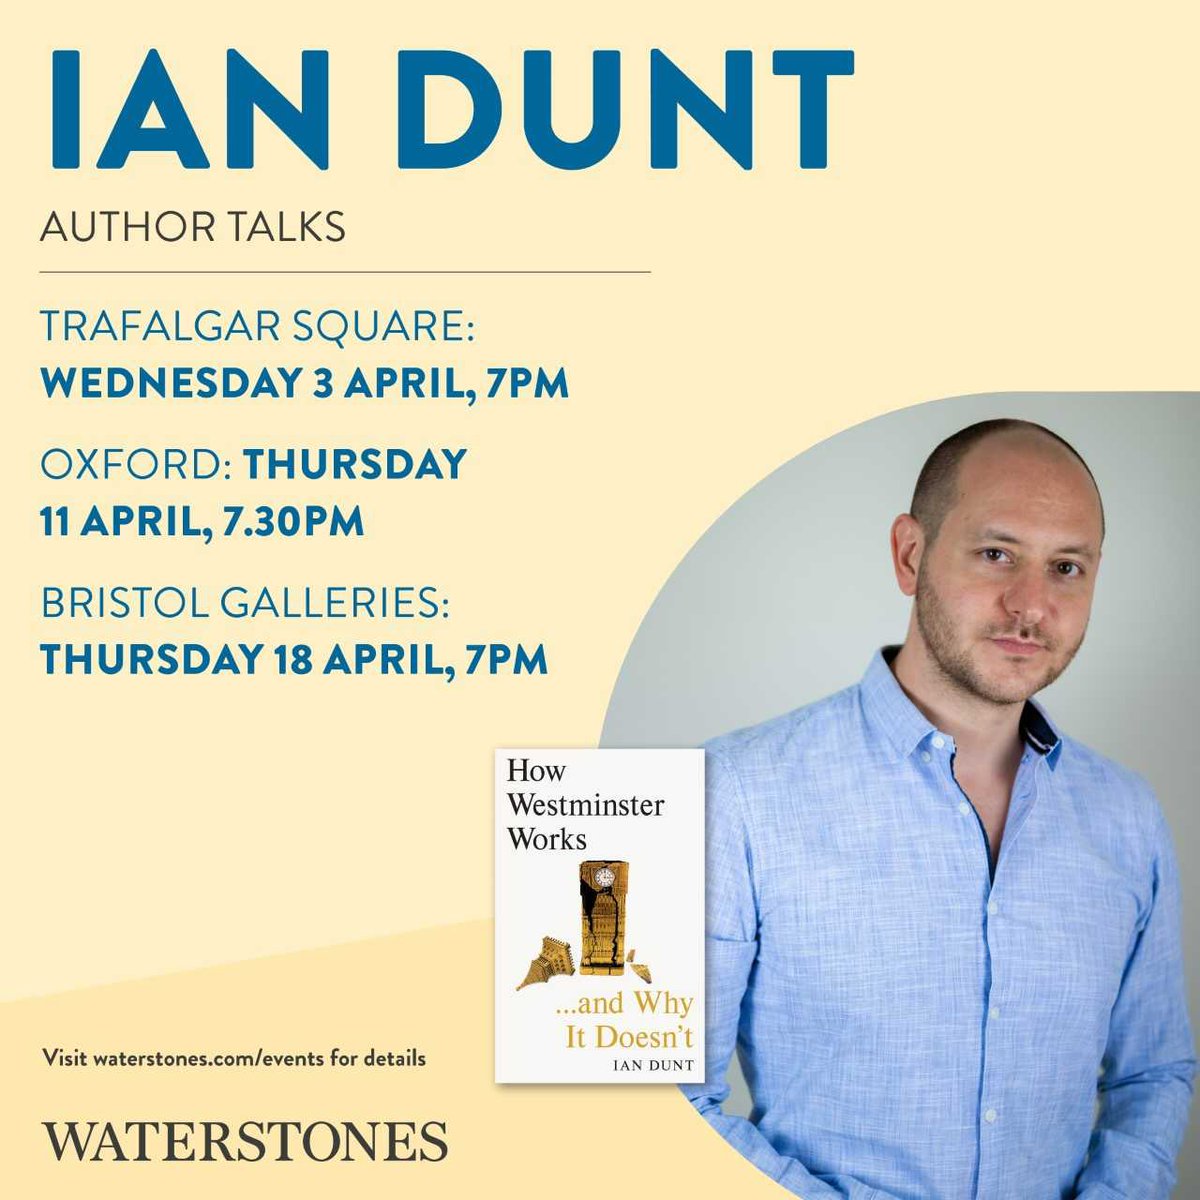 Join us on the 11th April for a fantastic event with @IanDunt as he discusses his bestselling book, How Westminster Works... and Why It Doesn't, details here: waterstones.com/events/an-even…